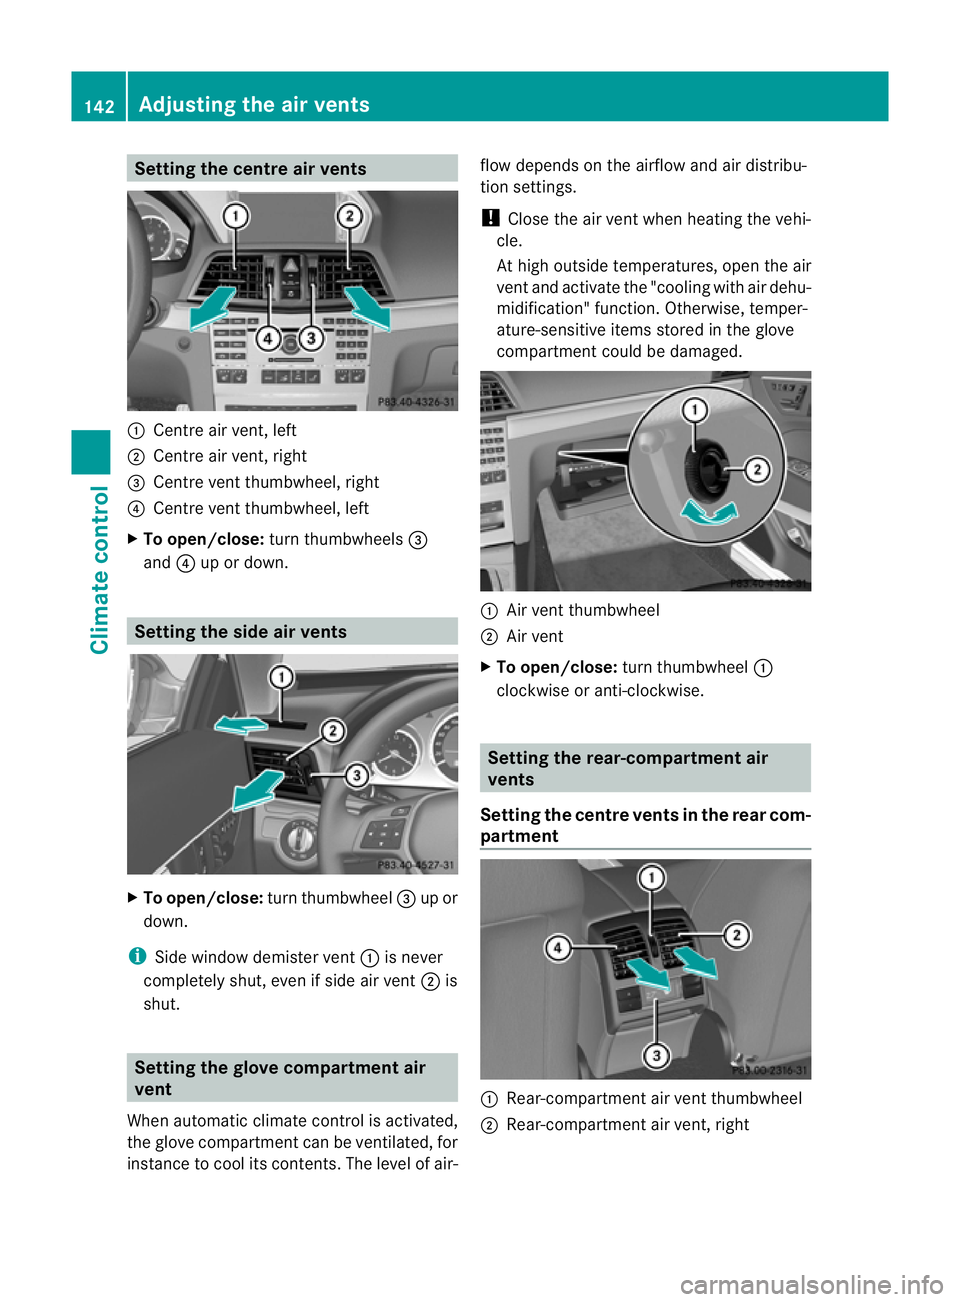 MERCEDES-BENZ E-CLASS CABRIOLET 2011  Owners Manual Setting the centre air vents
:
Centre air vent,l eft
; Centre air vent,r ight
= Centre vent thumbwheel, right
? Centre vent thumbwheel, left
X To open/close: turn thumbwheels =
and ?up or down. Settin